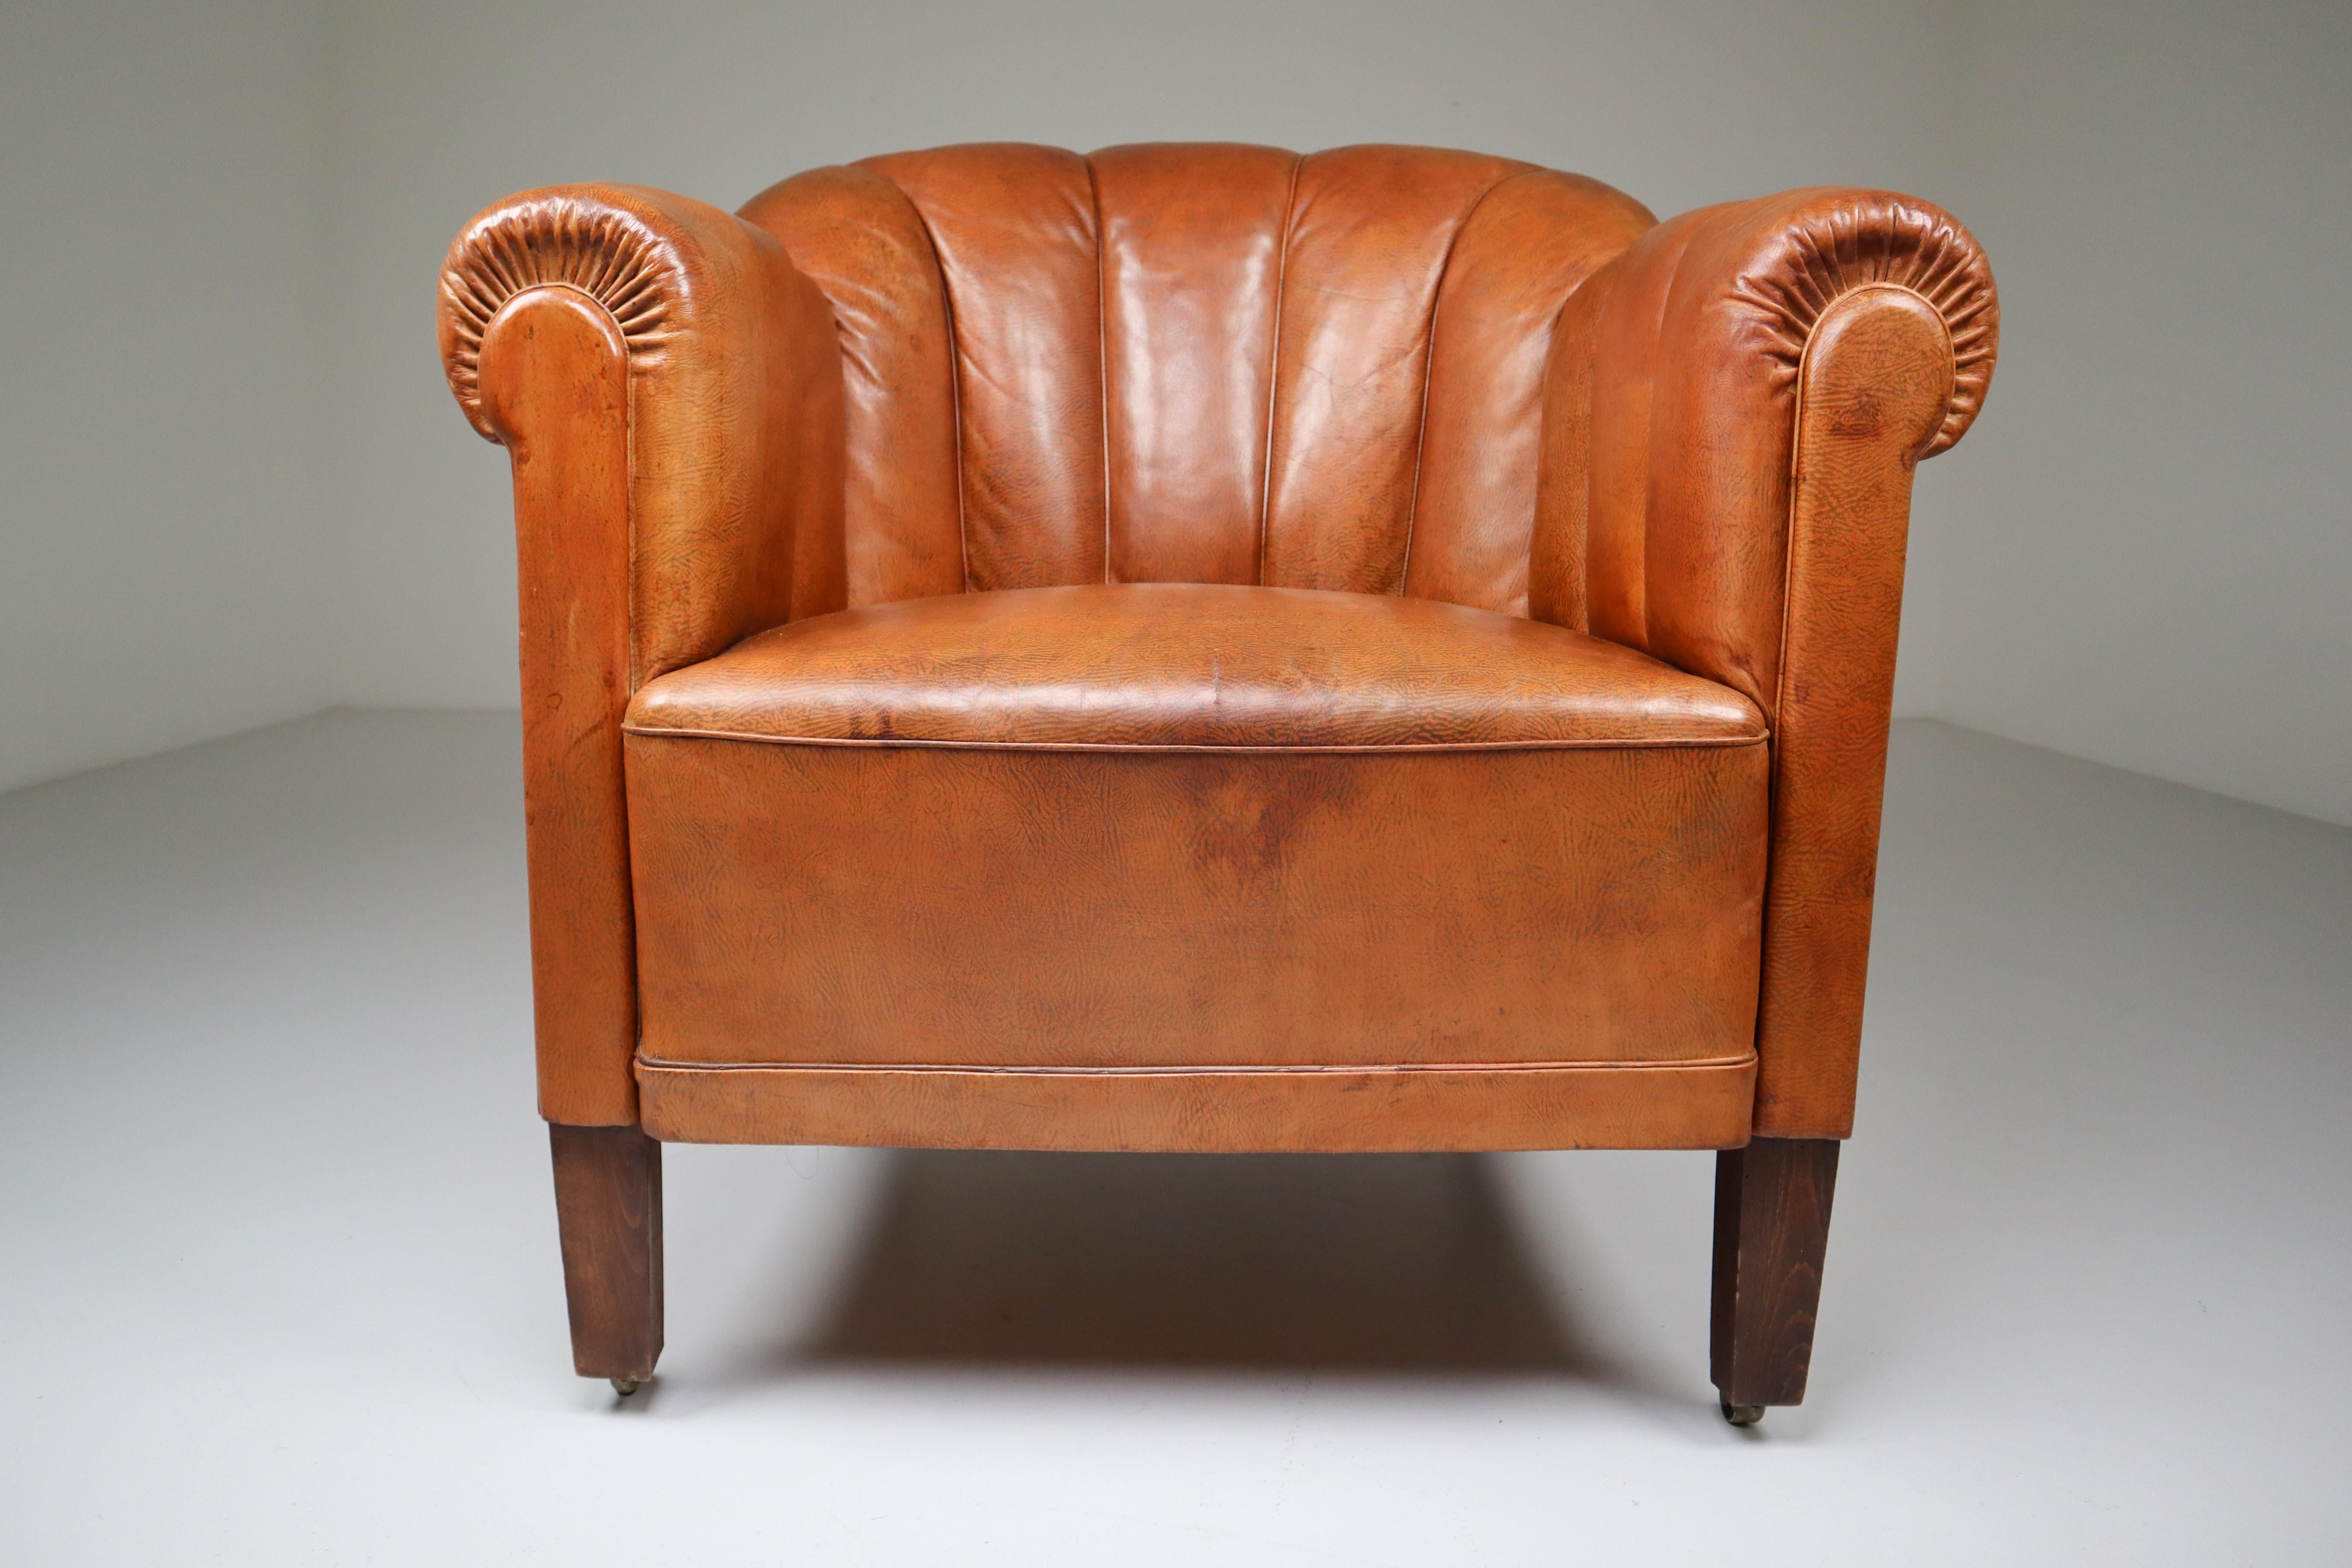 Czech Art Deco Club Chair in Patinated Cognac Leather, Praque, 1930s